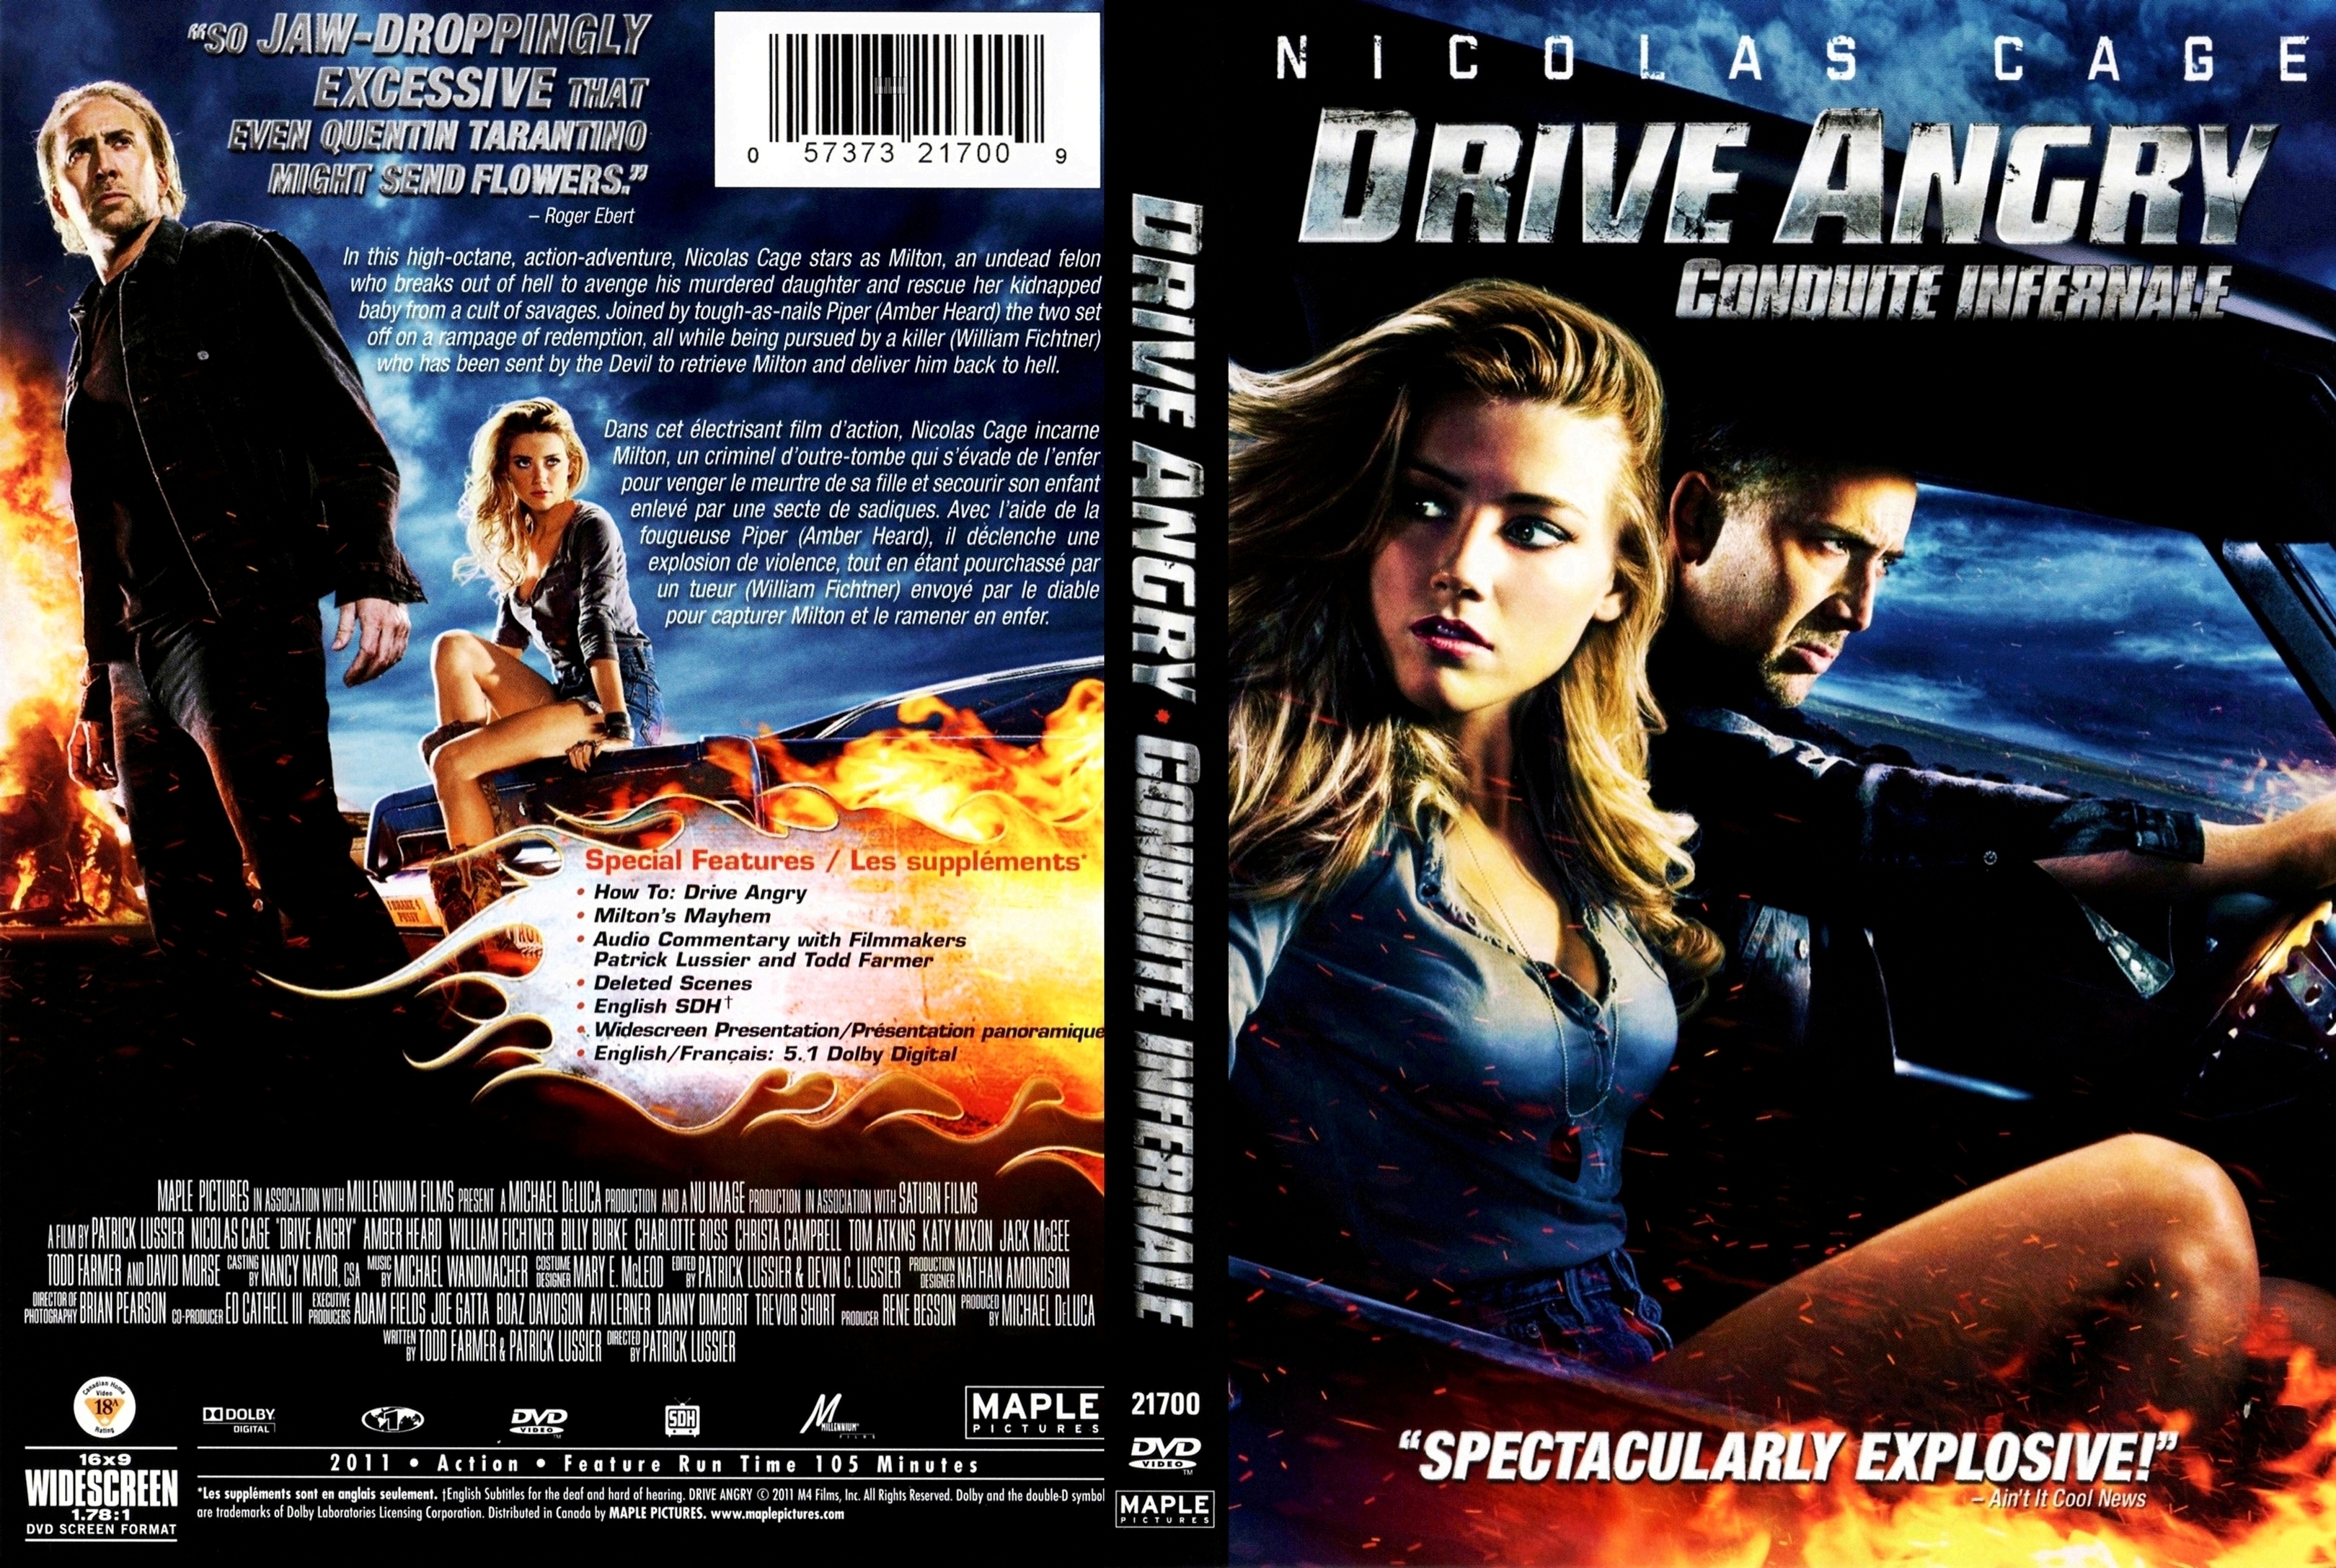 Jaquette DVD Conduite infernale - Drive angry (Canadienne)